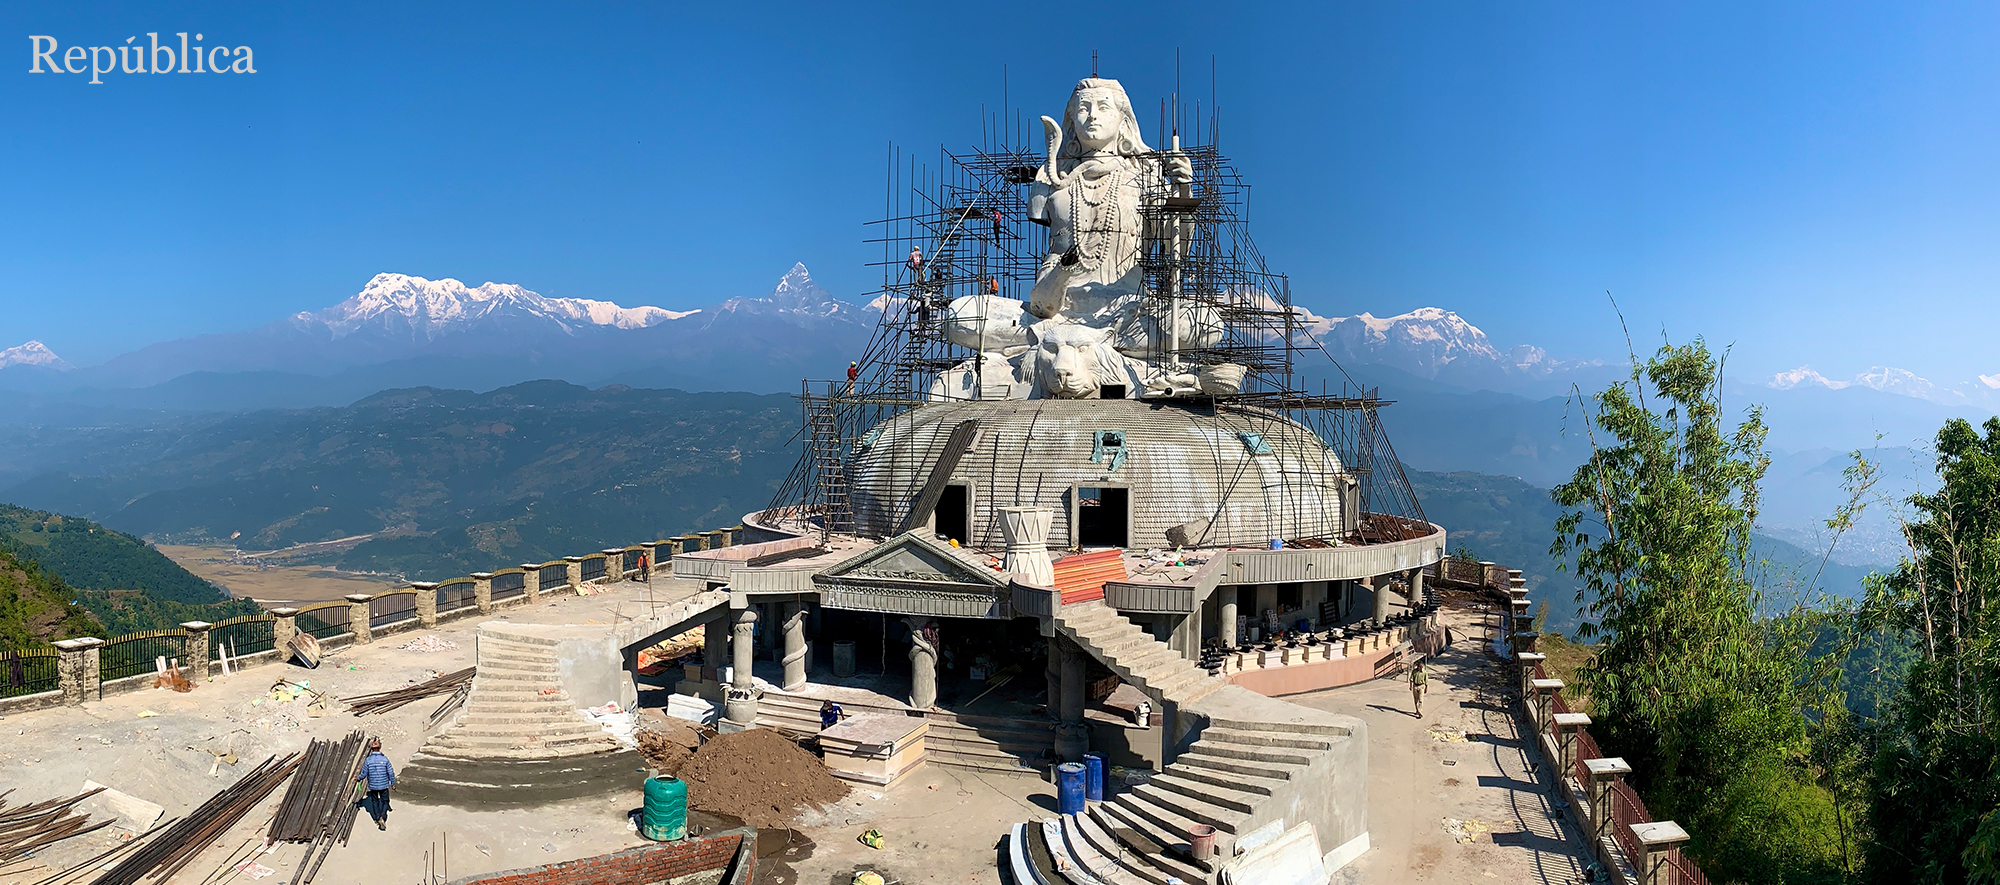 Nepal’s tallest Shiva statue being built in Pokhara, expected to boost religious tourism (with photos)